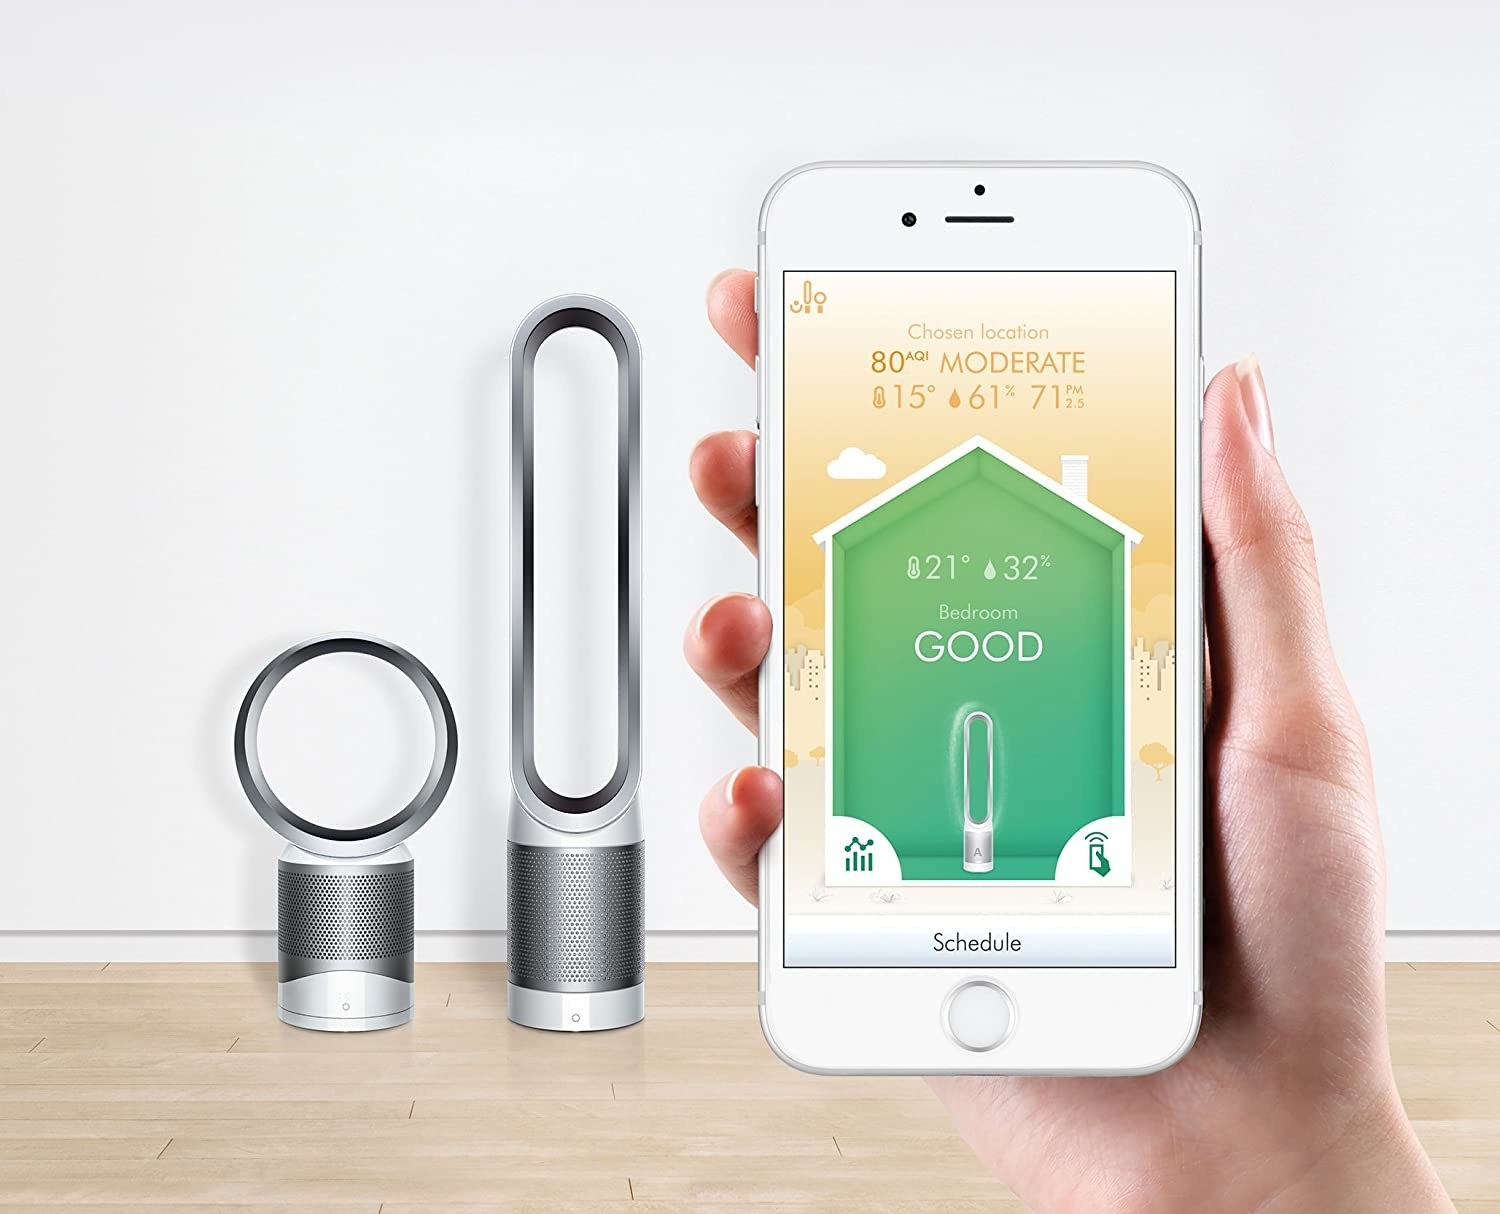 A Dyson Pure Cool Link Tower in front of a close up of a person holding a smartphone with the Dyson app open on it